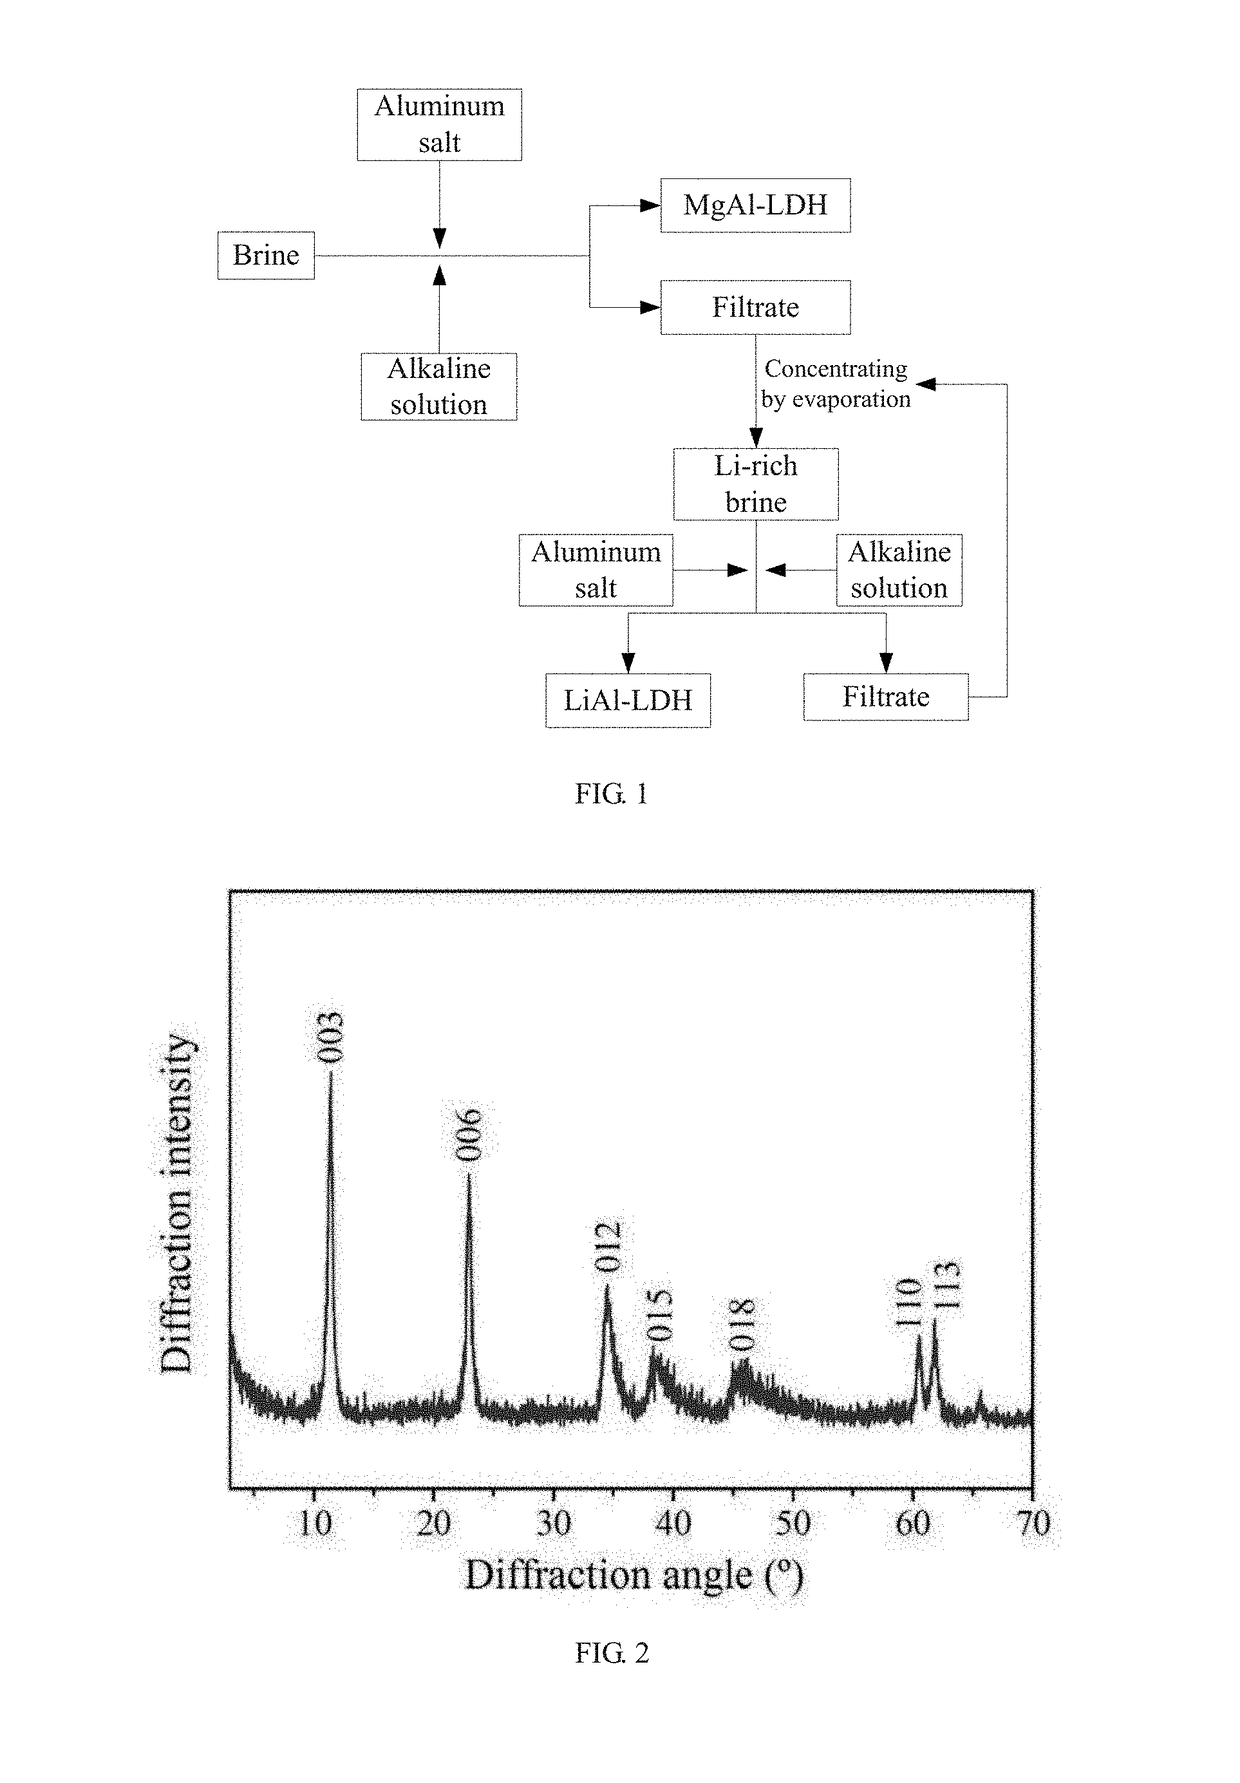 Method for extracting magnesium and lithium and producing layered double hydroxide from brine